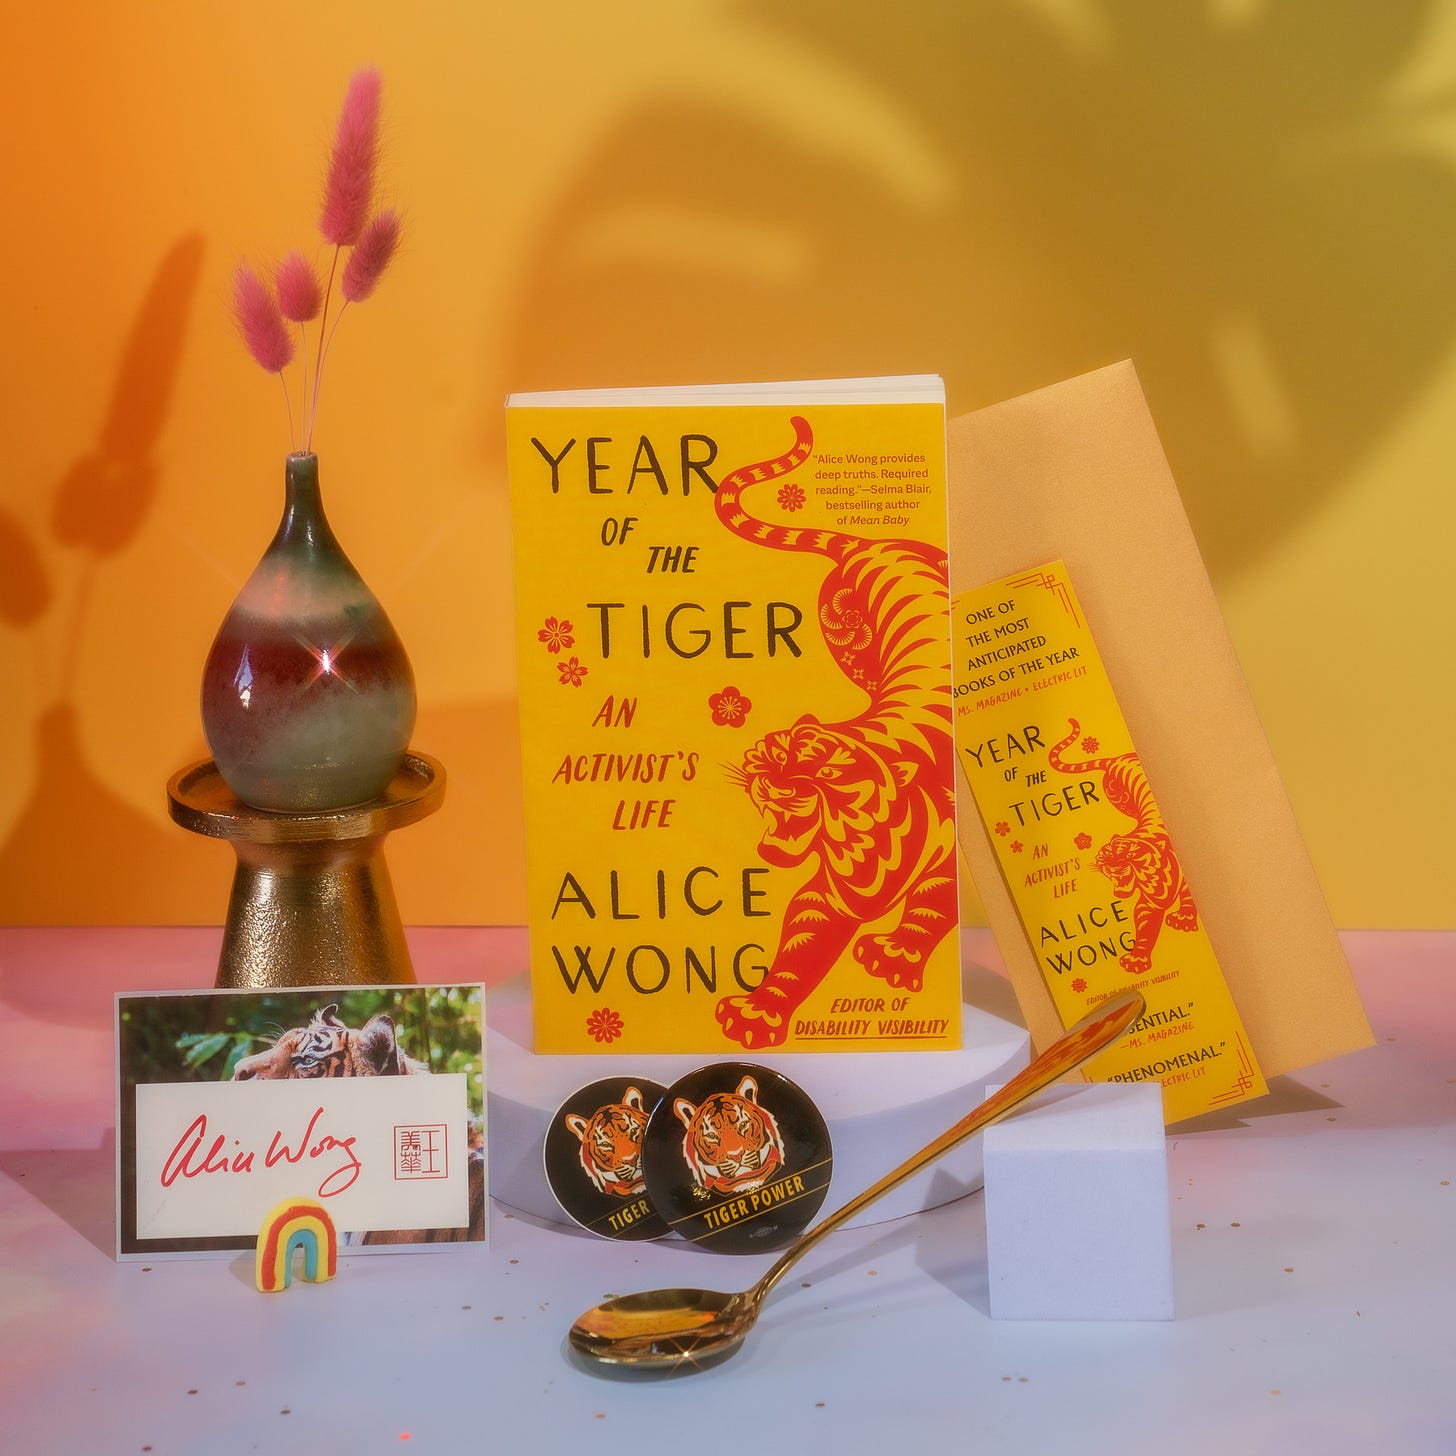 Photo with a tangerine background with a pink border at the bottom with a copy of Year of the Tiger paperback in the center. A tiger bookmark positioned to the right of the book. On the left is a multicolored pear-shaped vase holding pink floral decorations. A signed tiger bookplate by Alice Wong in front of the vase with a small rainbow decor standing upright. In the center is one round tiger sticker and one round tiger button with a gold dipper spoon from @umeshiso_ positioned horizontally at an angle. A tiger bookmark positioned to the right of the book. Photo credit: @ziru.mo (on IG)